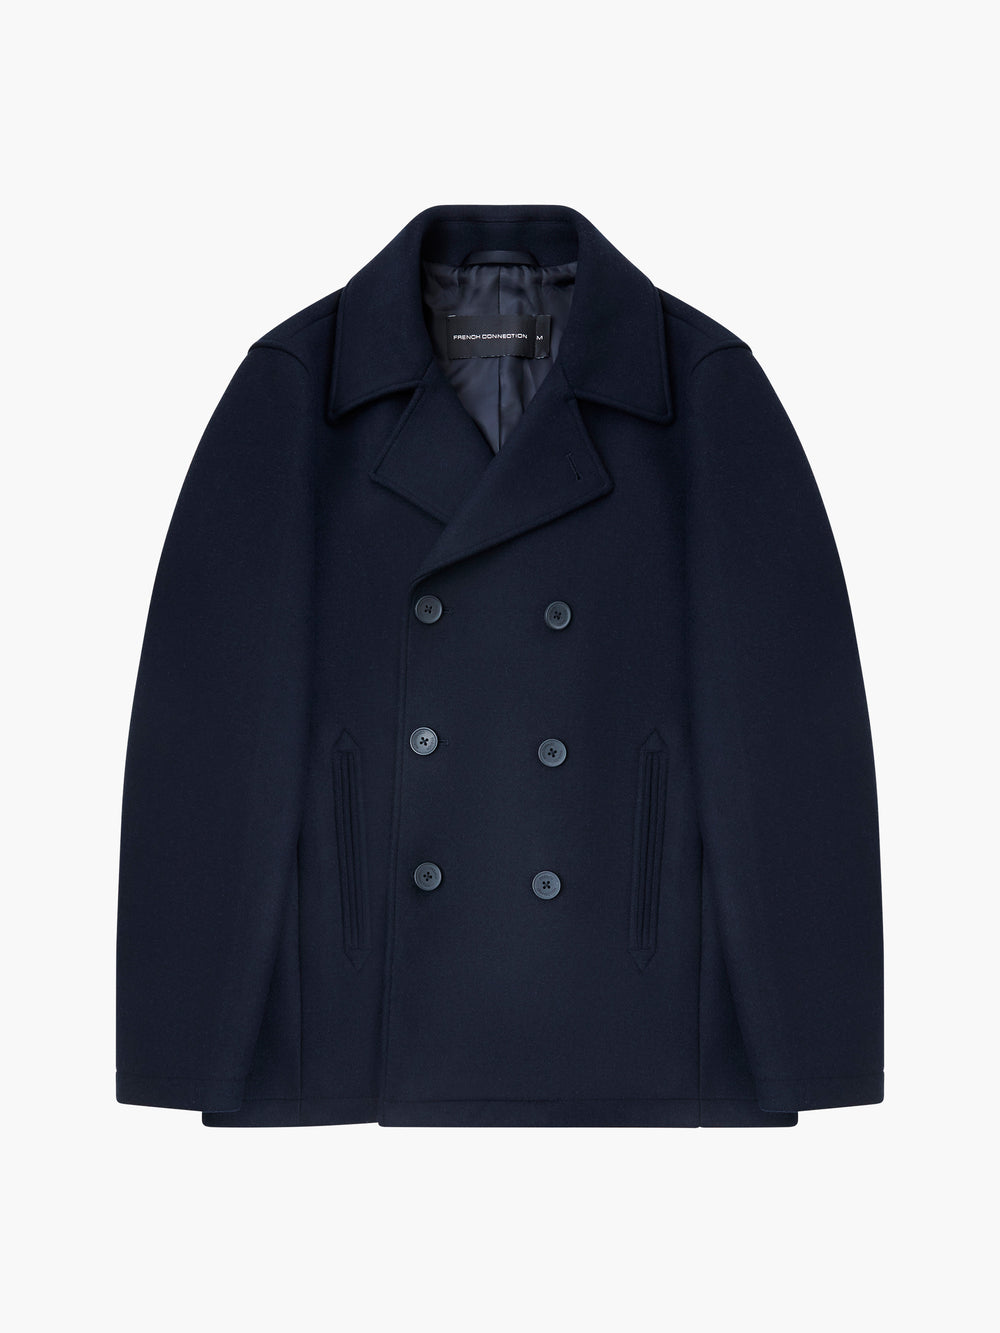 Double Breasted Peacoat Navy | French Connection UK